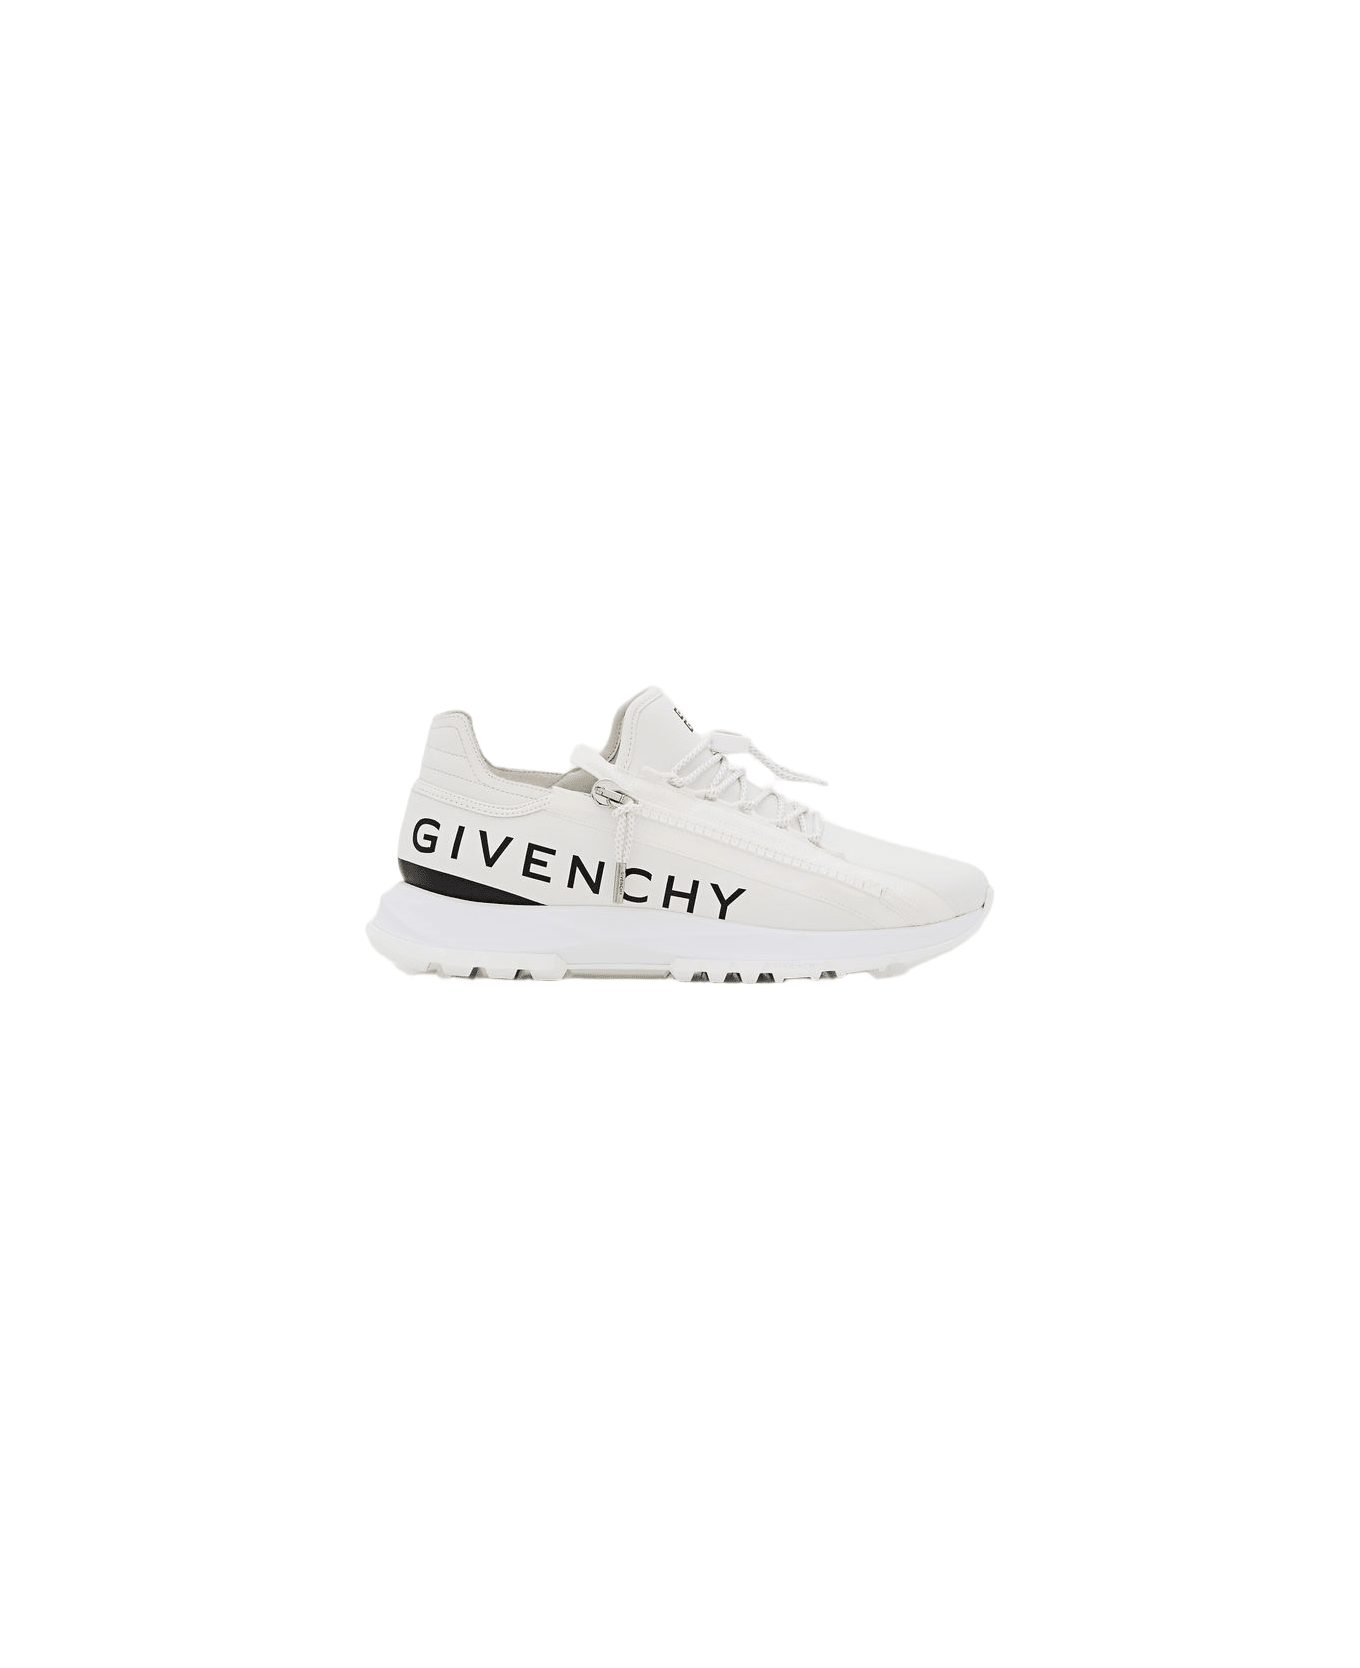 Givenchy Spectre Zip Sneaker - White